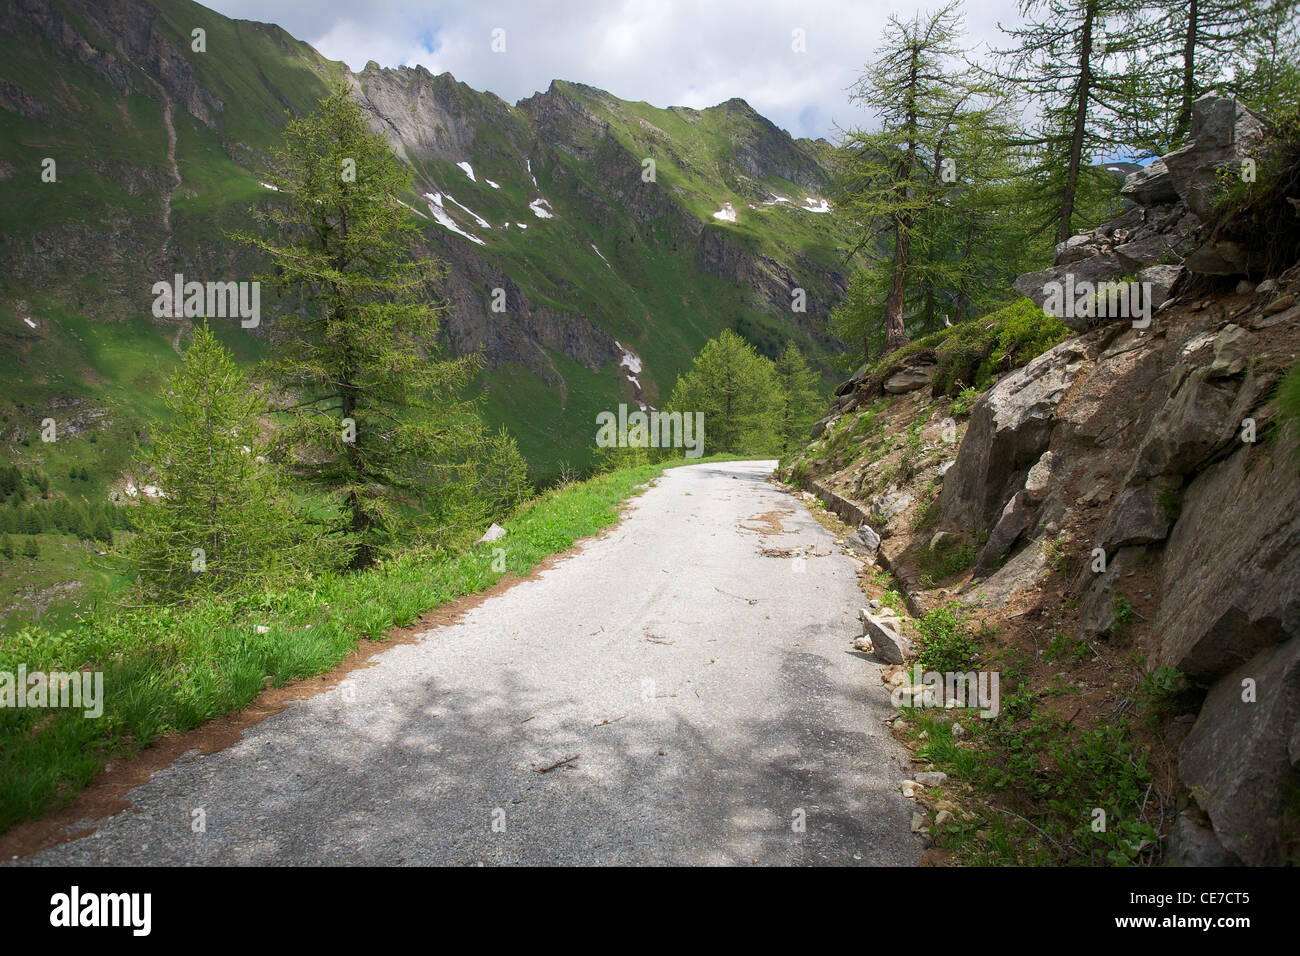 Dangerous road in the mountains of Switzerland Stock Photo